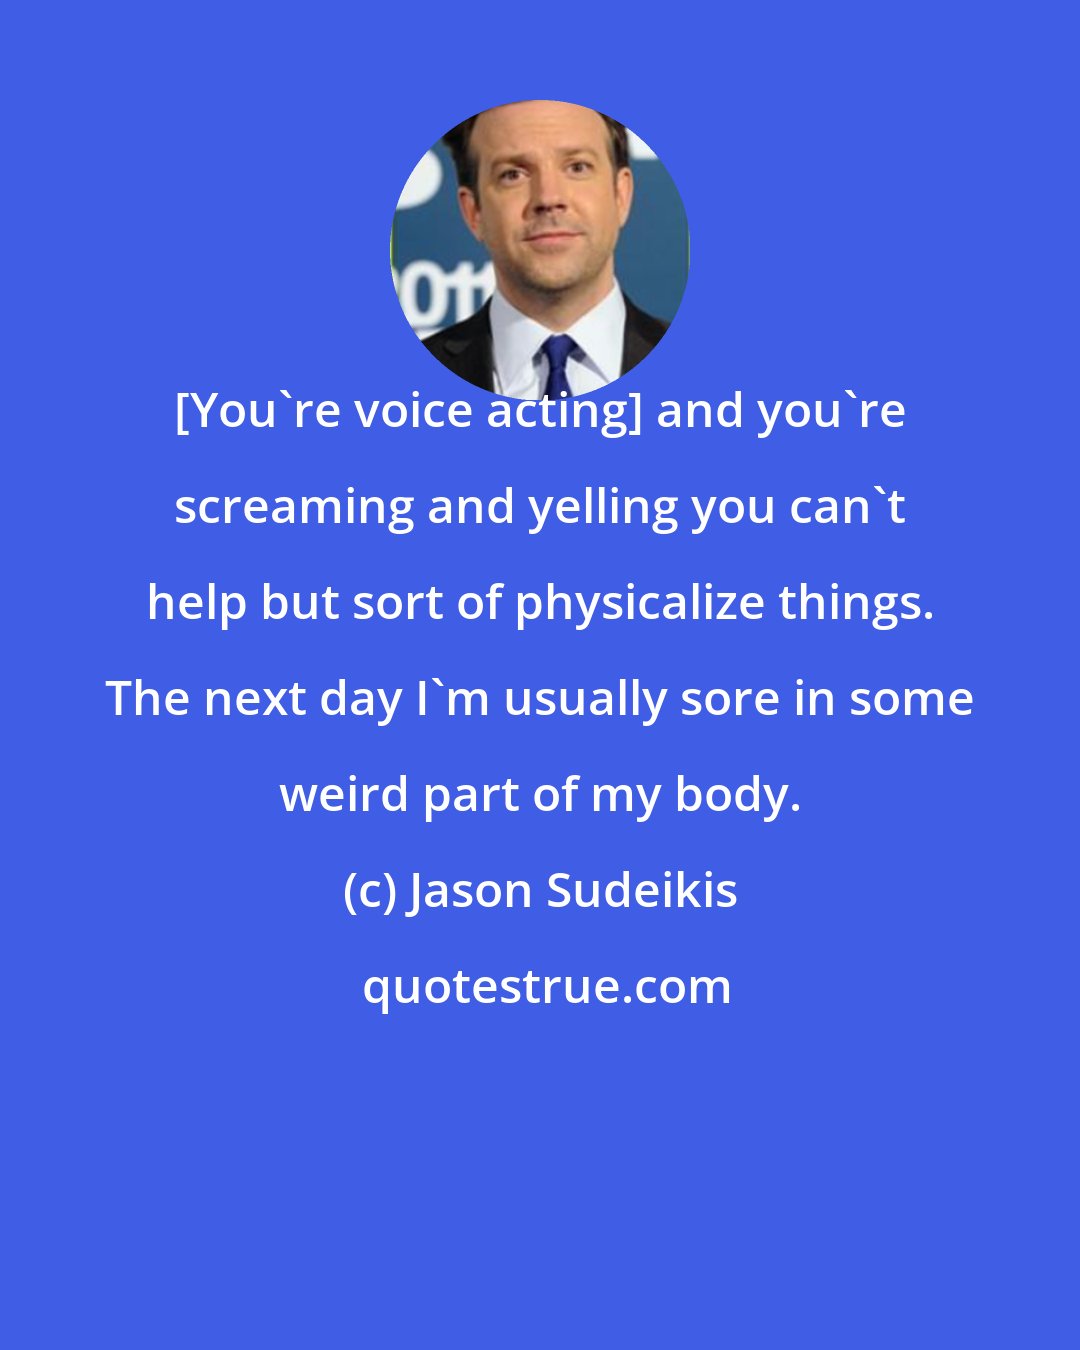 Jason Sudeikis: [You're voice acting] and you're screaming and yelling you can't help but sort of physicalize things. The next day I'm usually sore in some weird part of my body.